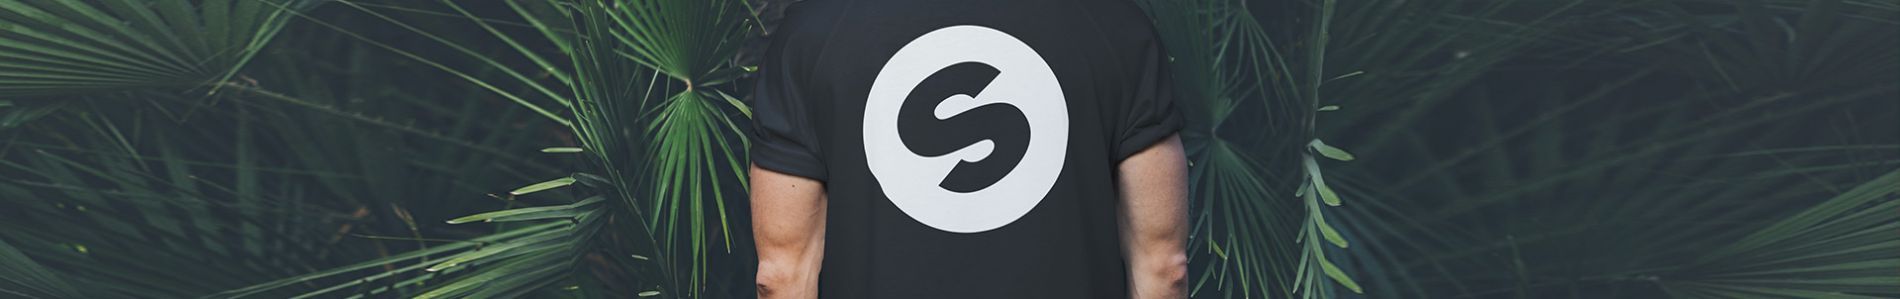 Free Spinnin’ Records Tees!